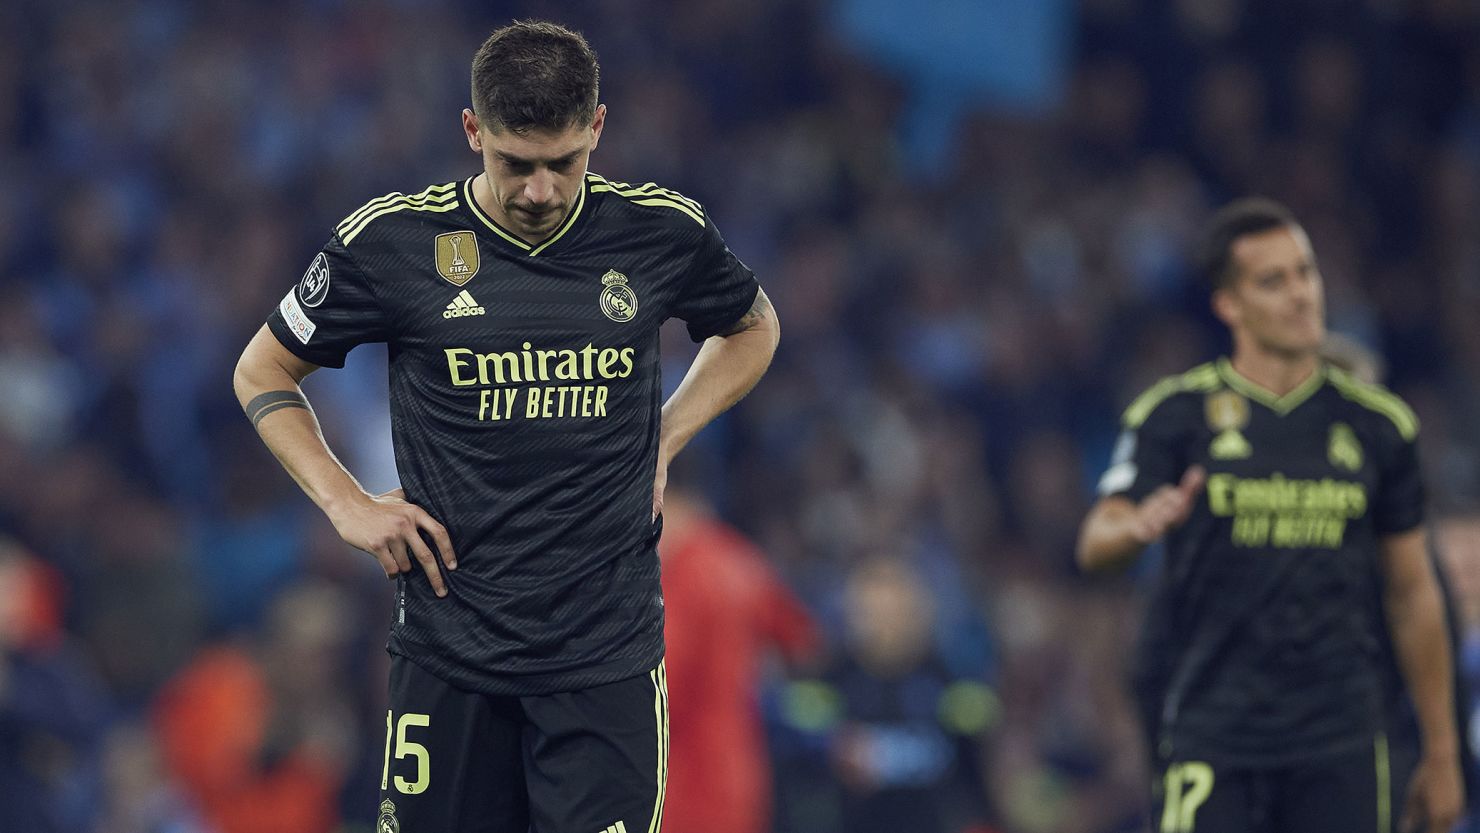 Real Madrid was humbled by Manchester City in the Champions League semifinal second leg. 